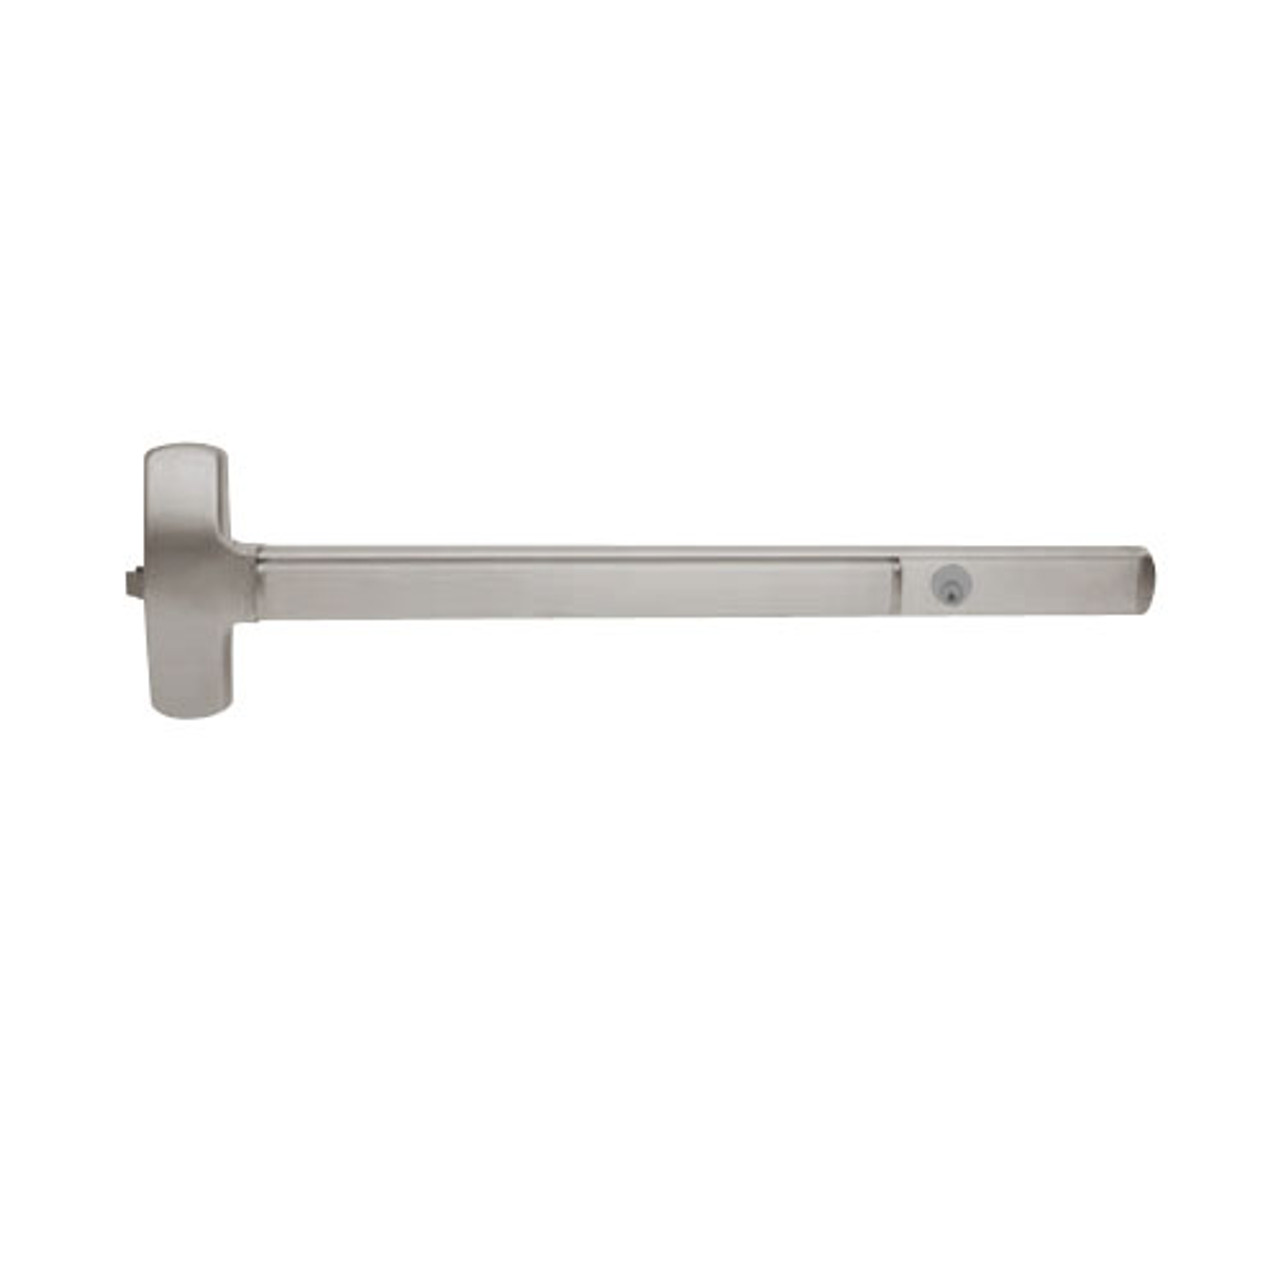 CD25-R-NL-OP-US32D-3 Falcon Exit Device in Satin Stainless Steel